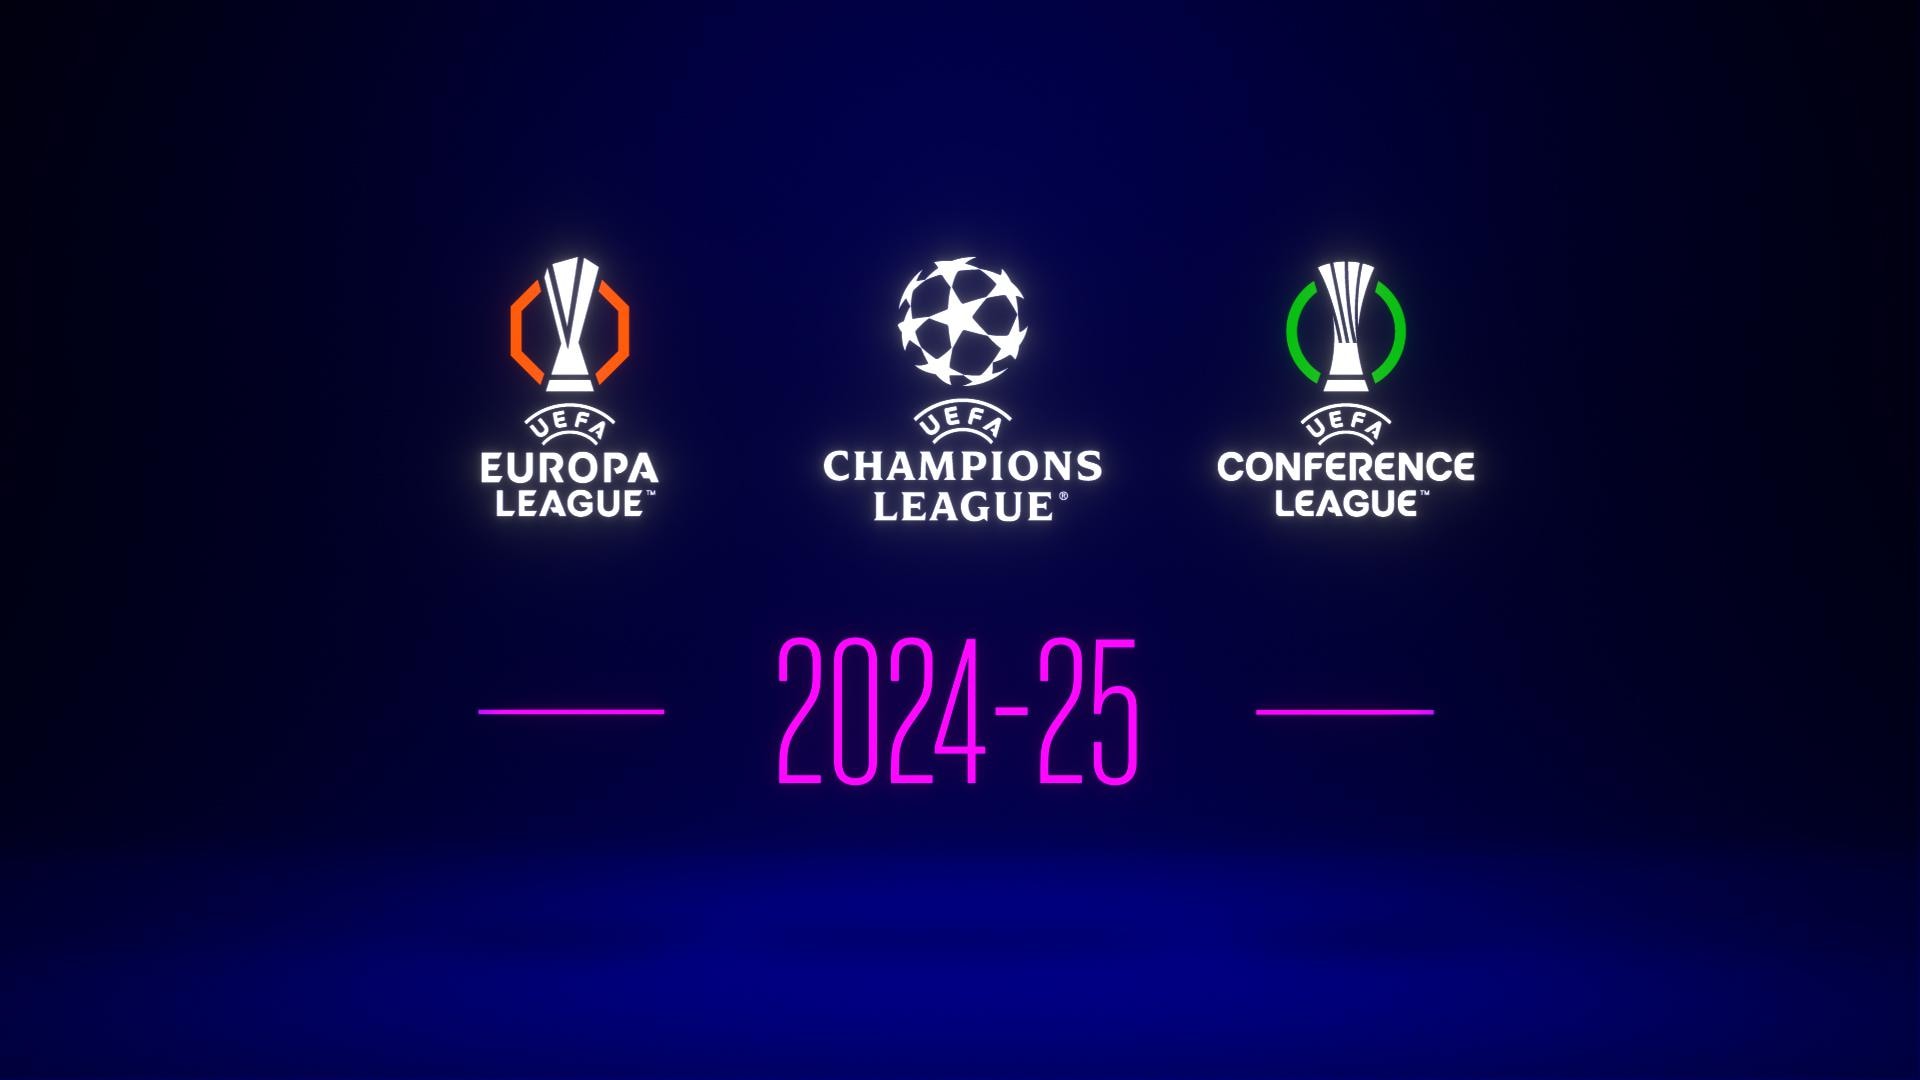 The club will change its badge as of the 2024-25 season - Club